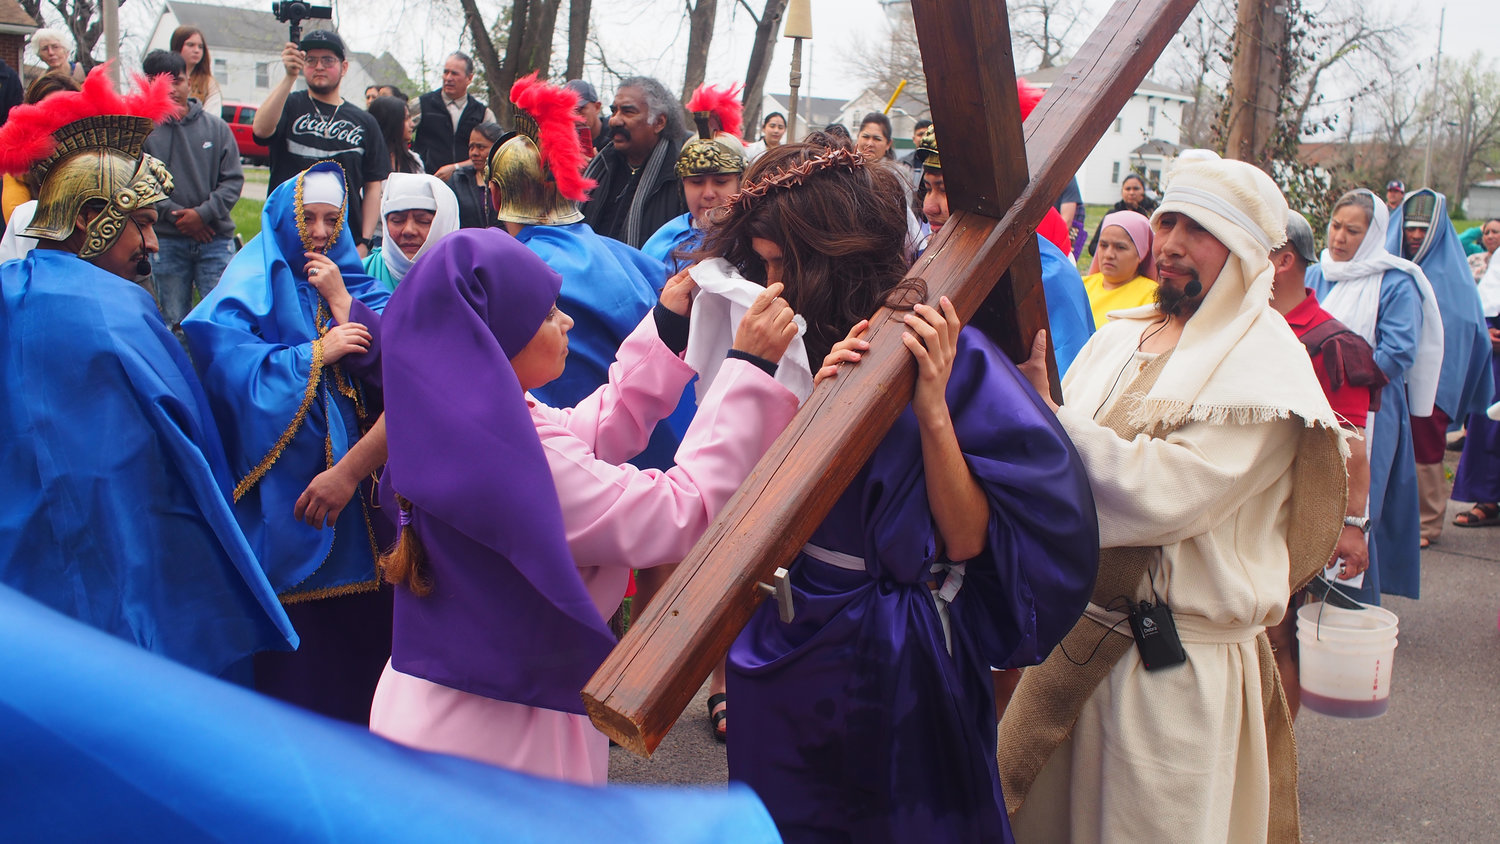 Veronica, played by St. Vincent de Paul parishioner Alyssa Luna wipes Jesus’ face during an outdoor reenactment of the Stations of the Cross on Good Friday outside St. Patrick Chapel in Sedalia. Jesus was portrayed by Mario Rojas.